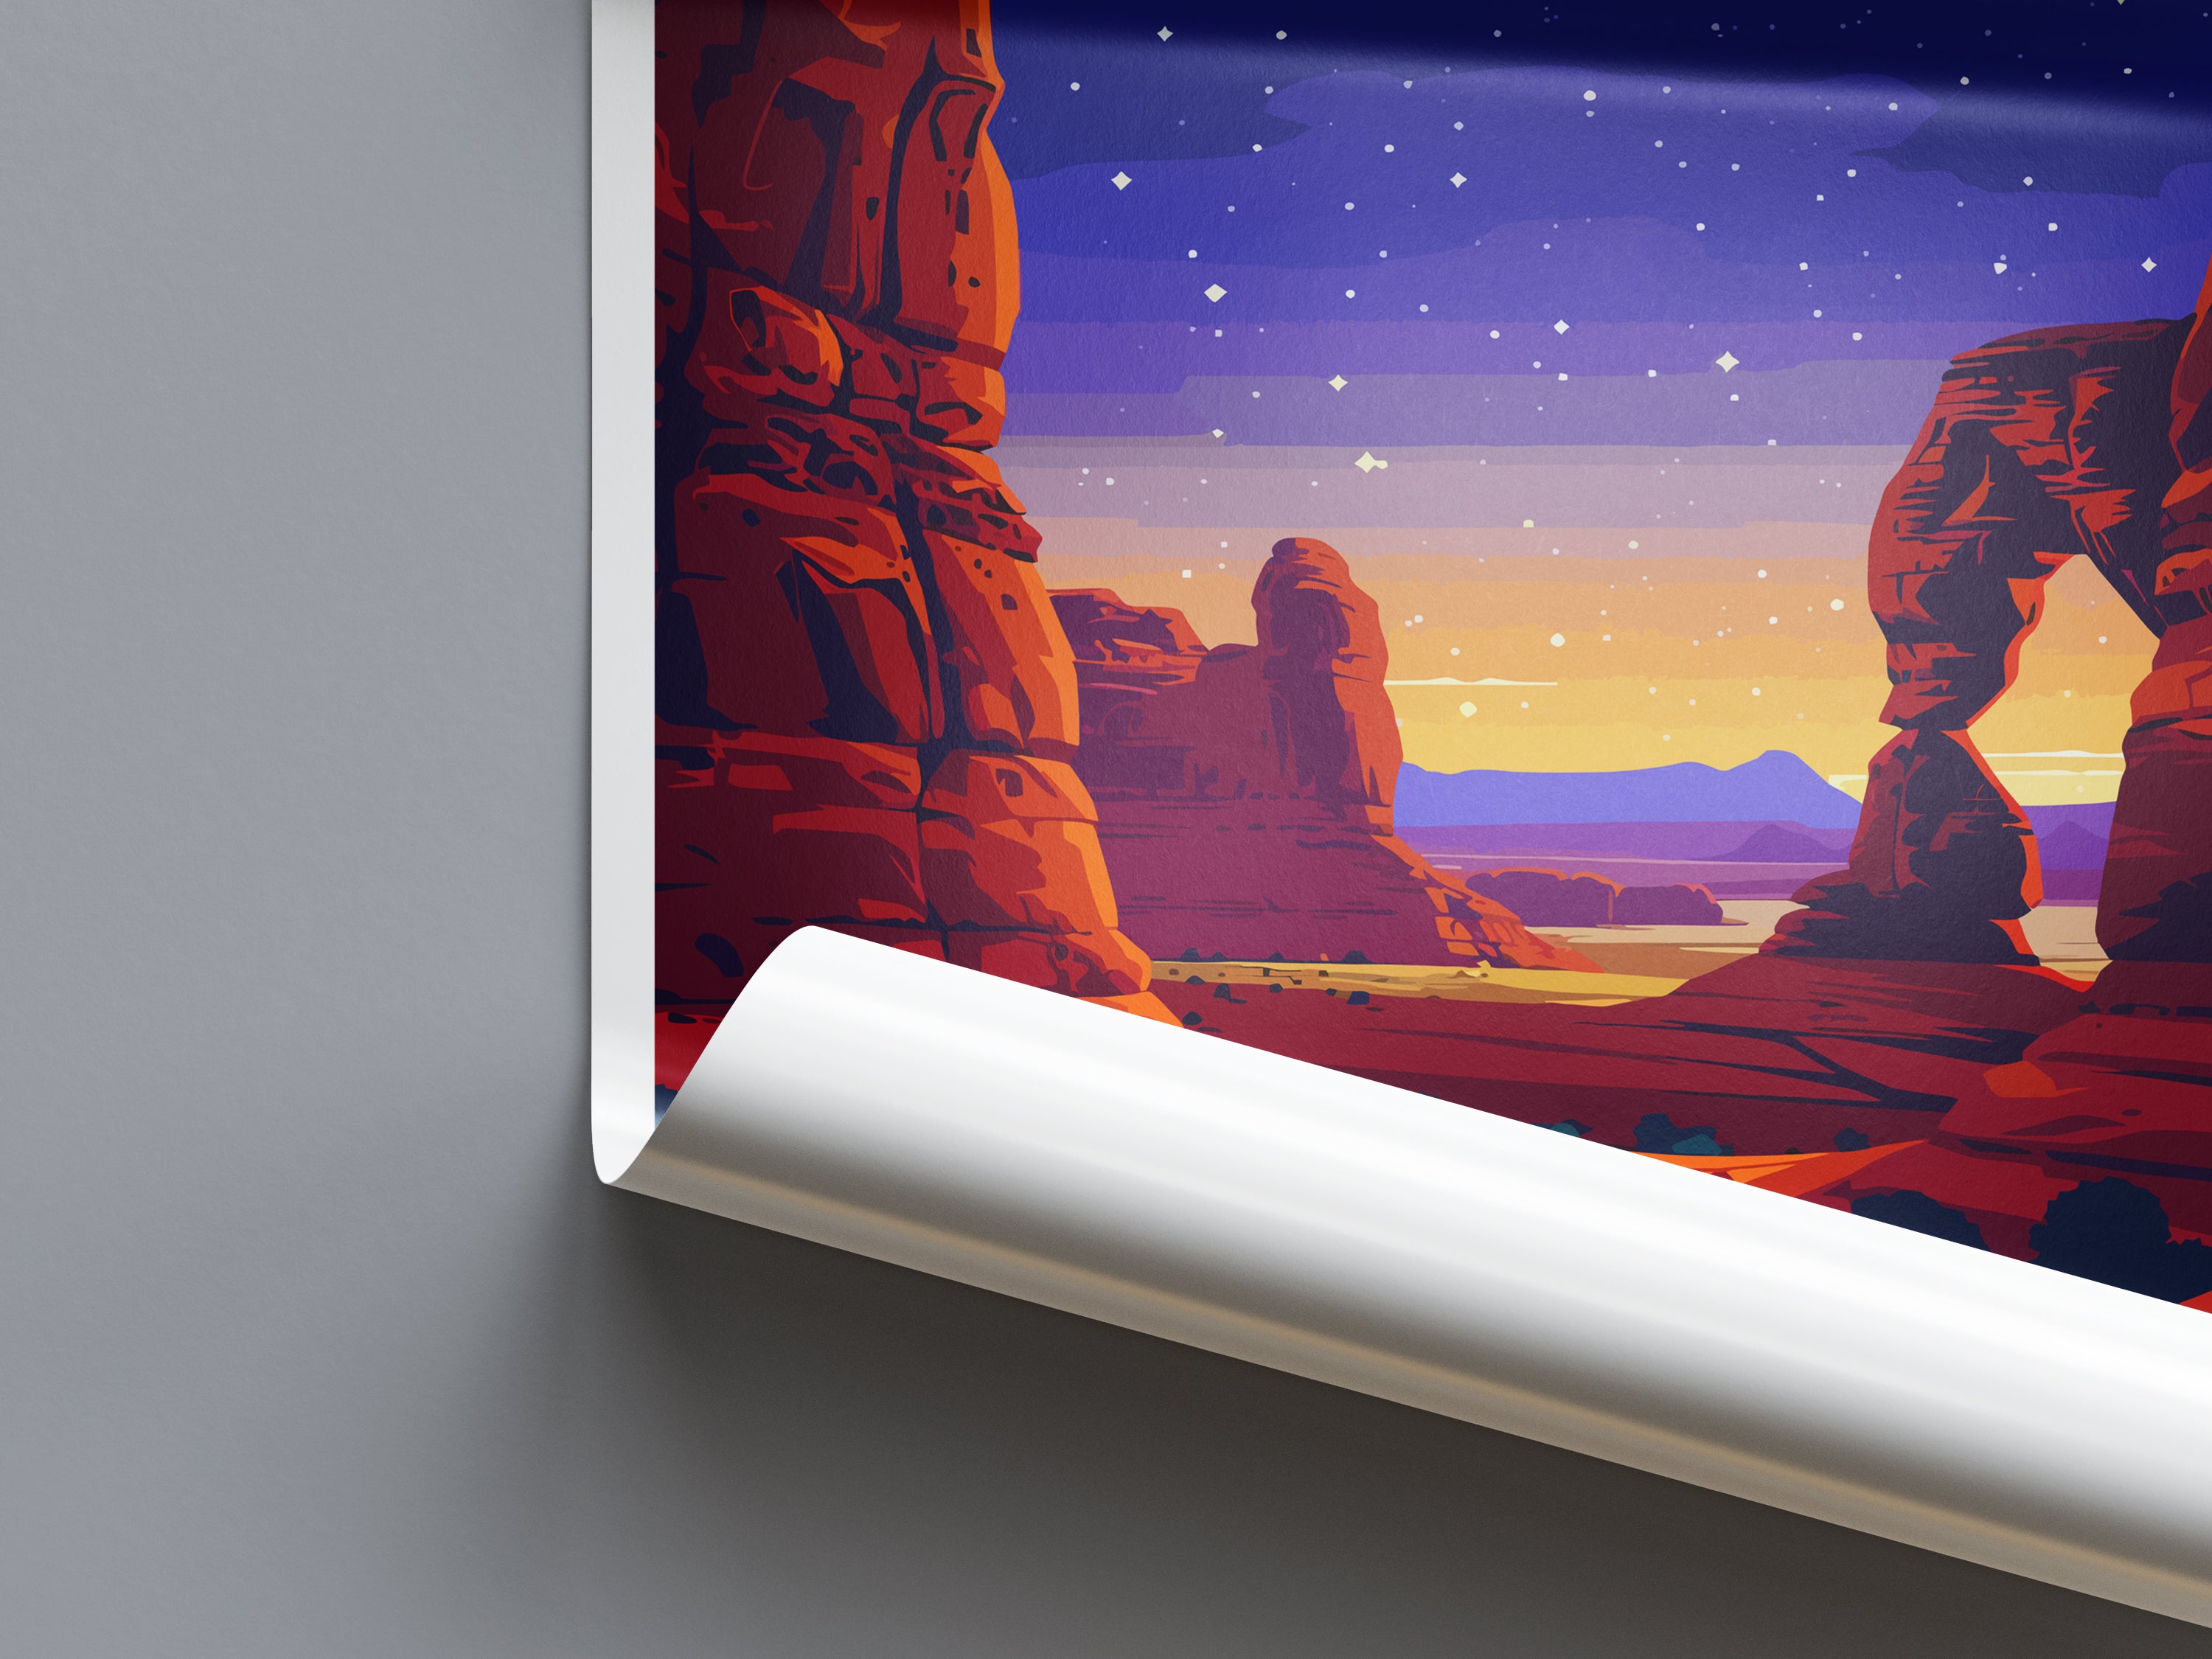 Arches US National Park Travel Print